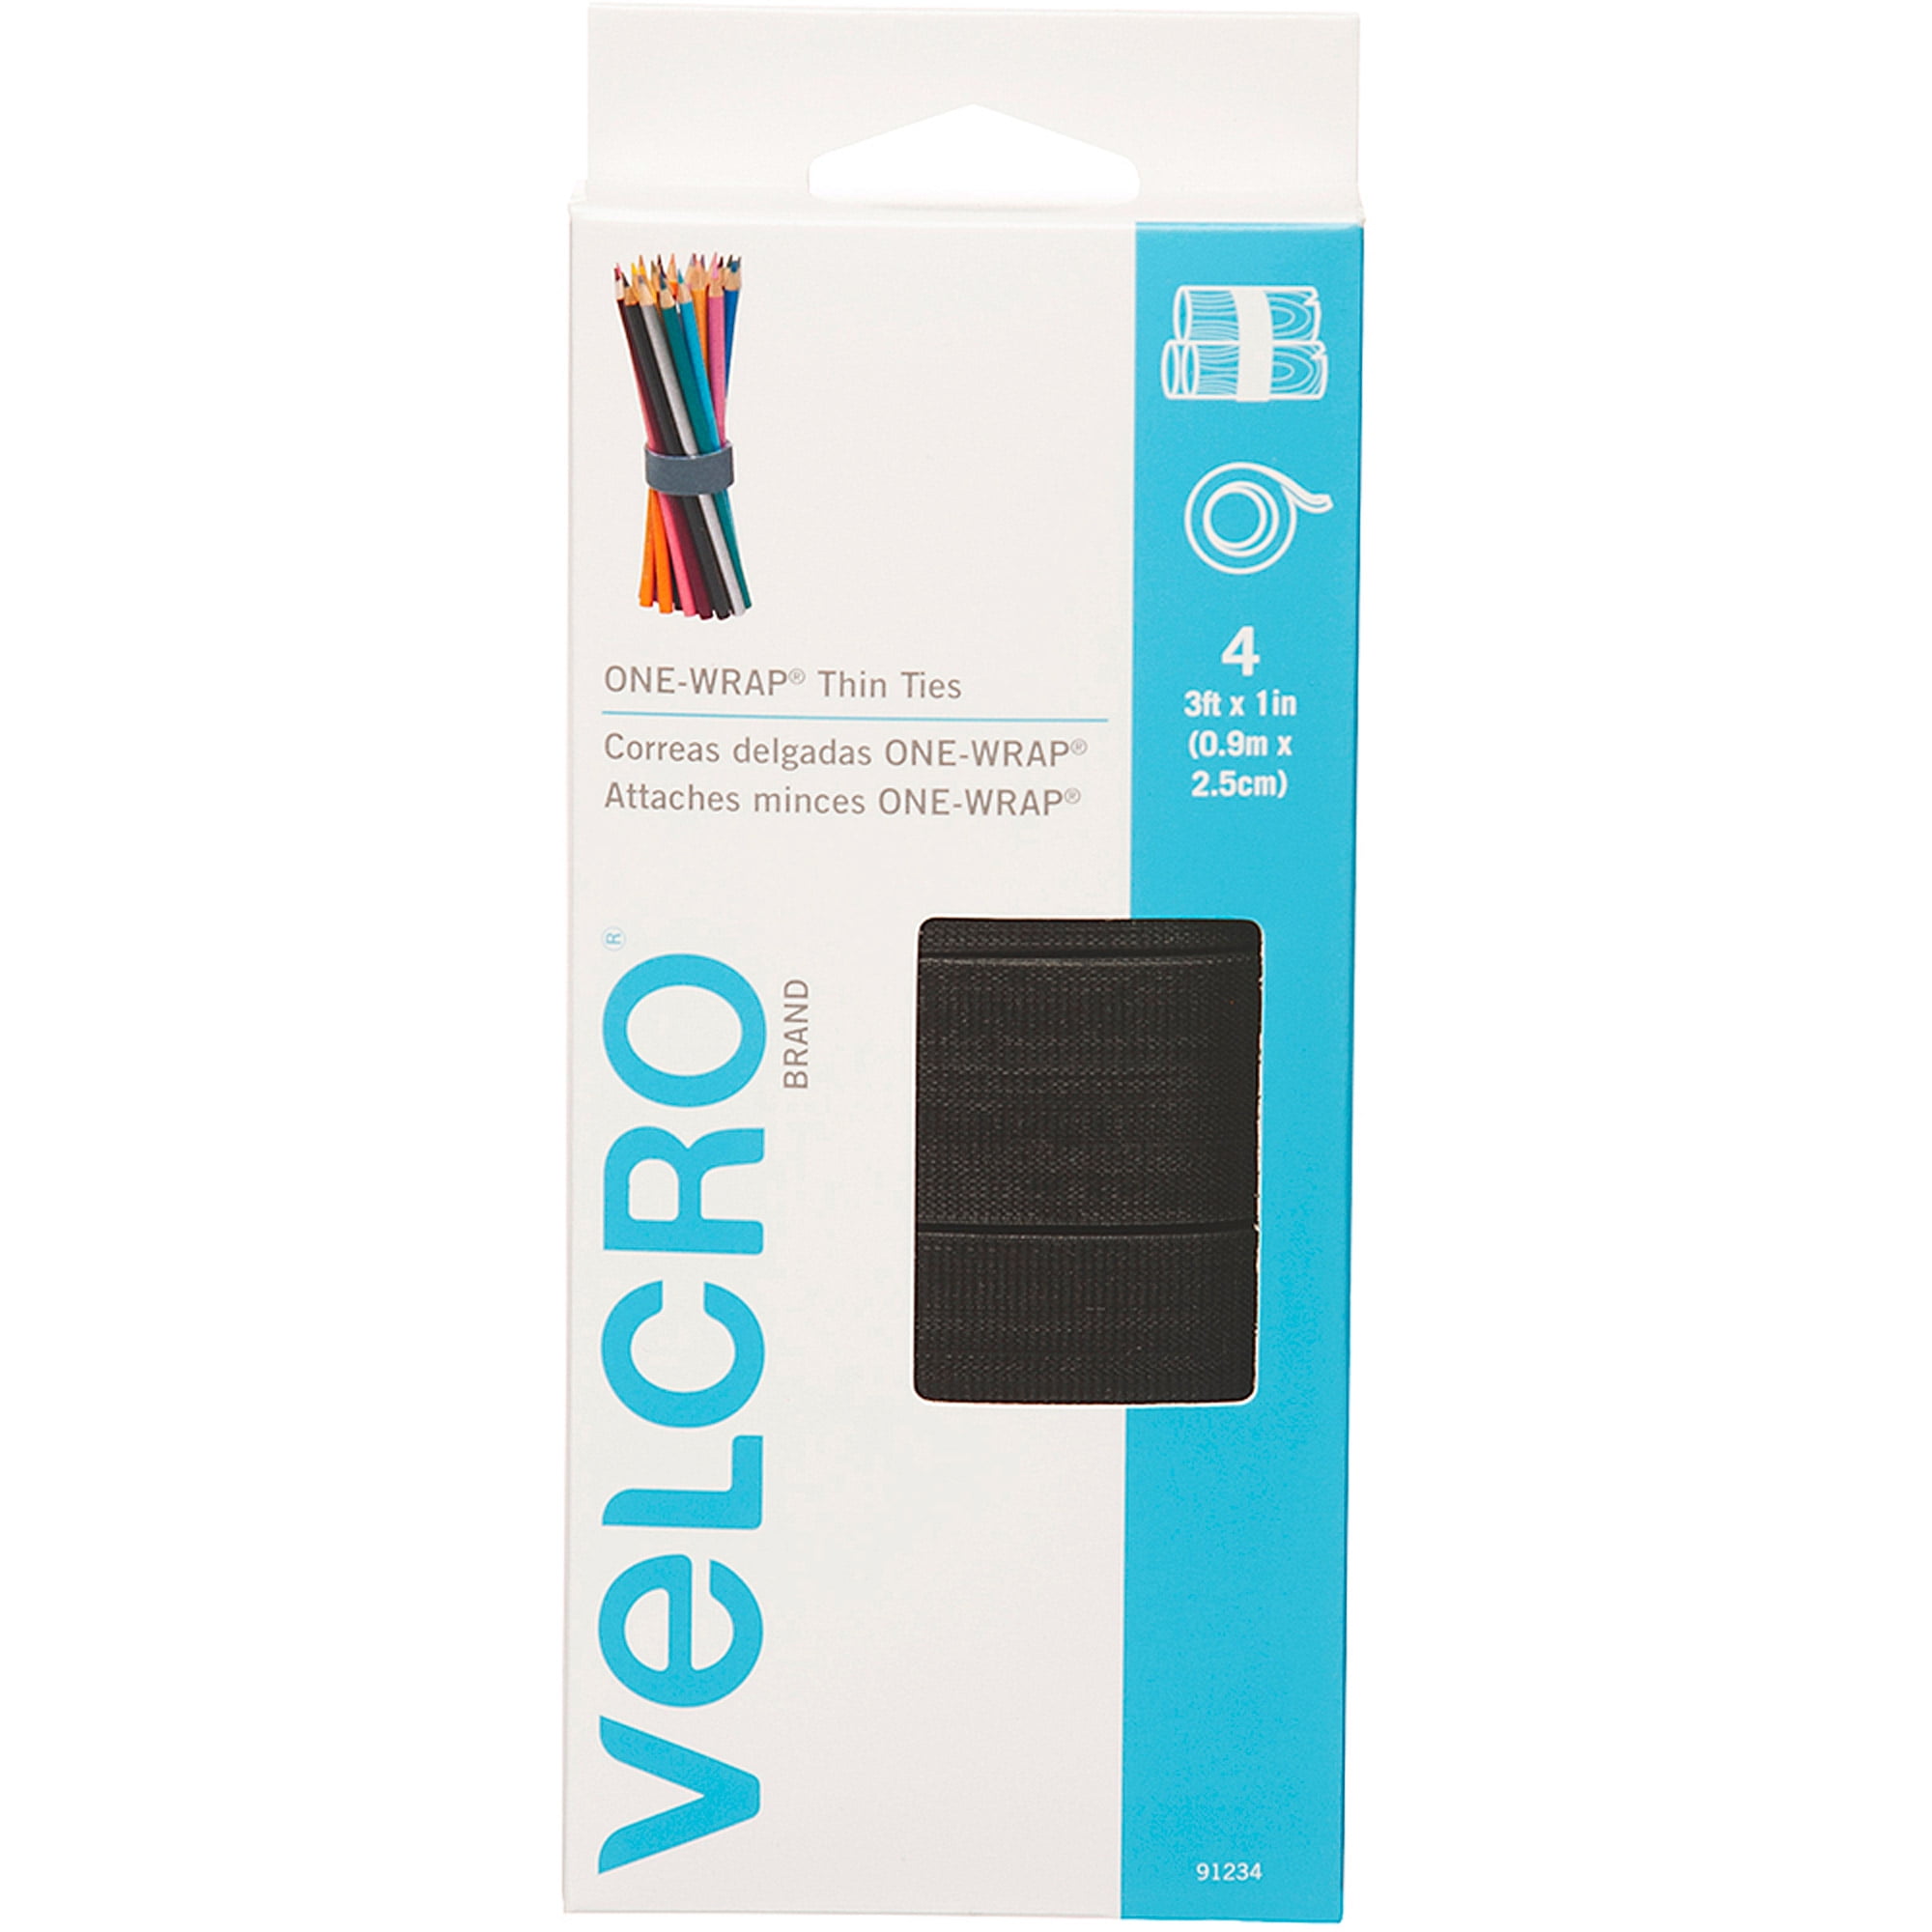 VELCRO Brand ONE-WRAP Ties Cable Management Self Grip Cable Ties Wires & Cords 